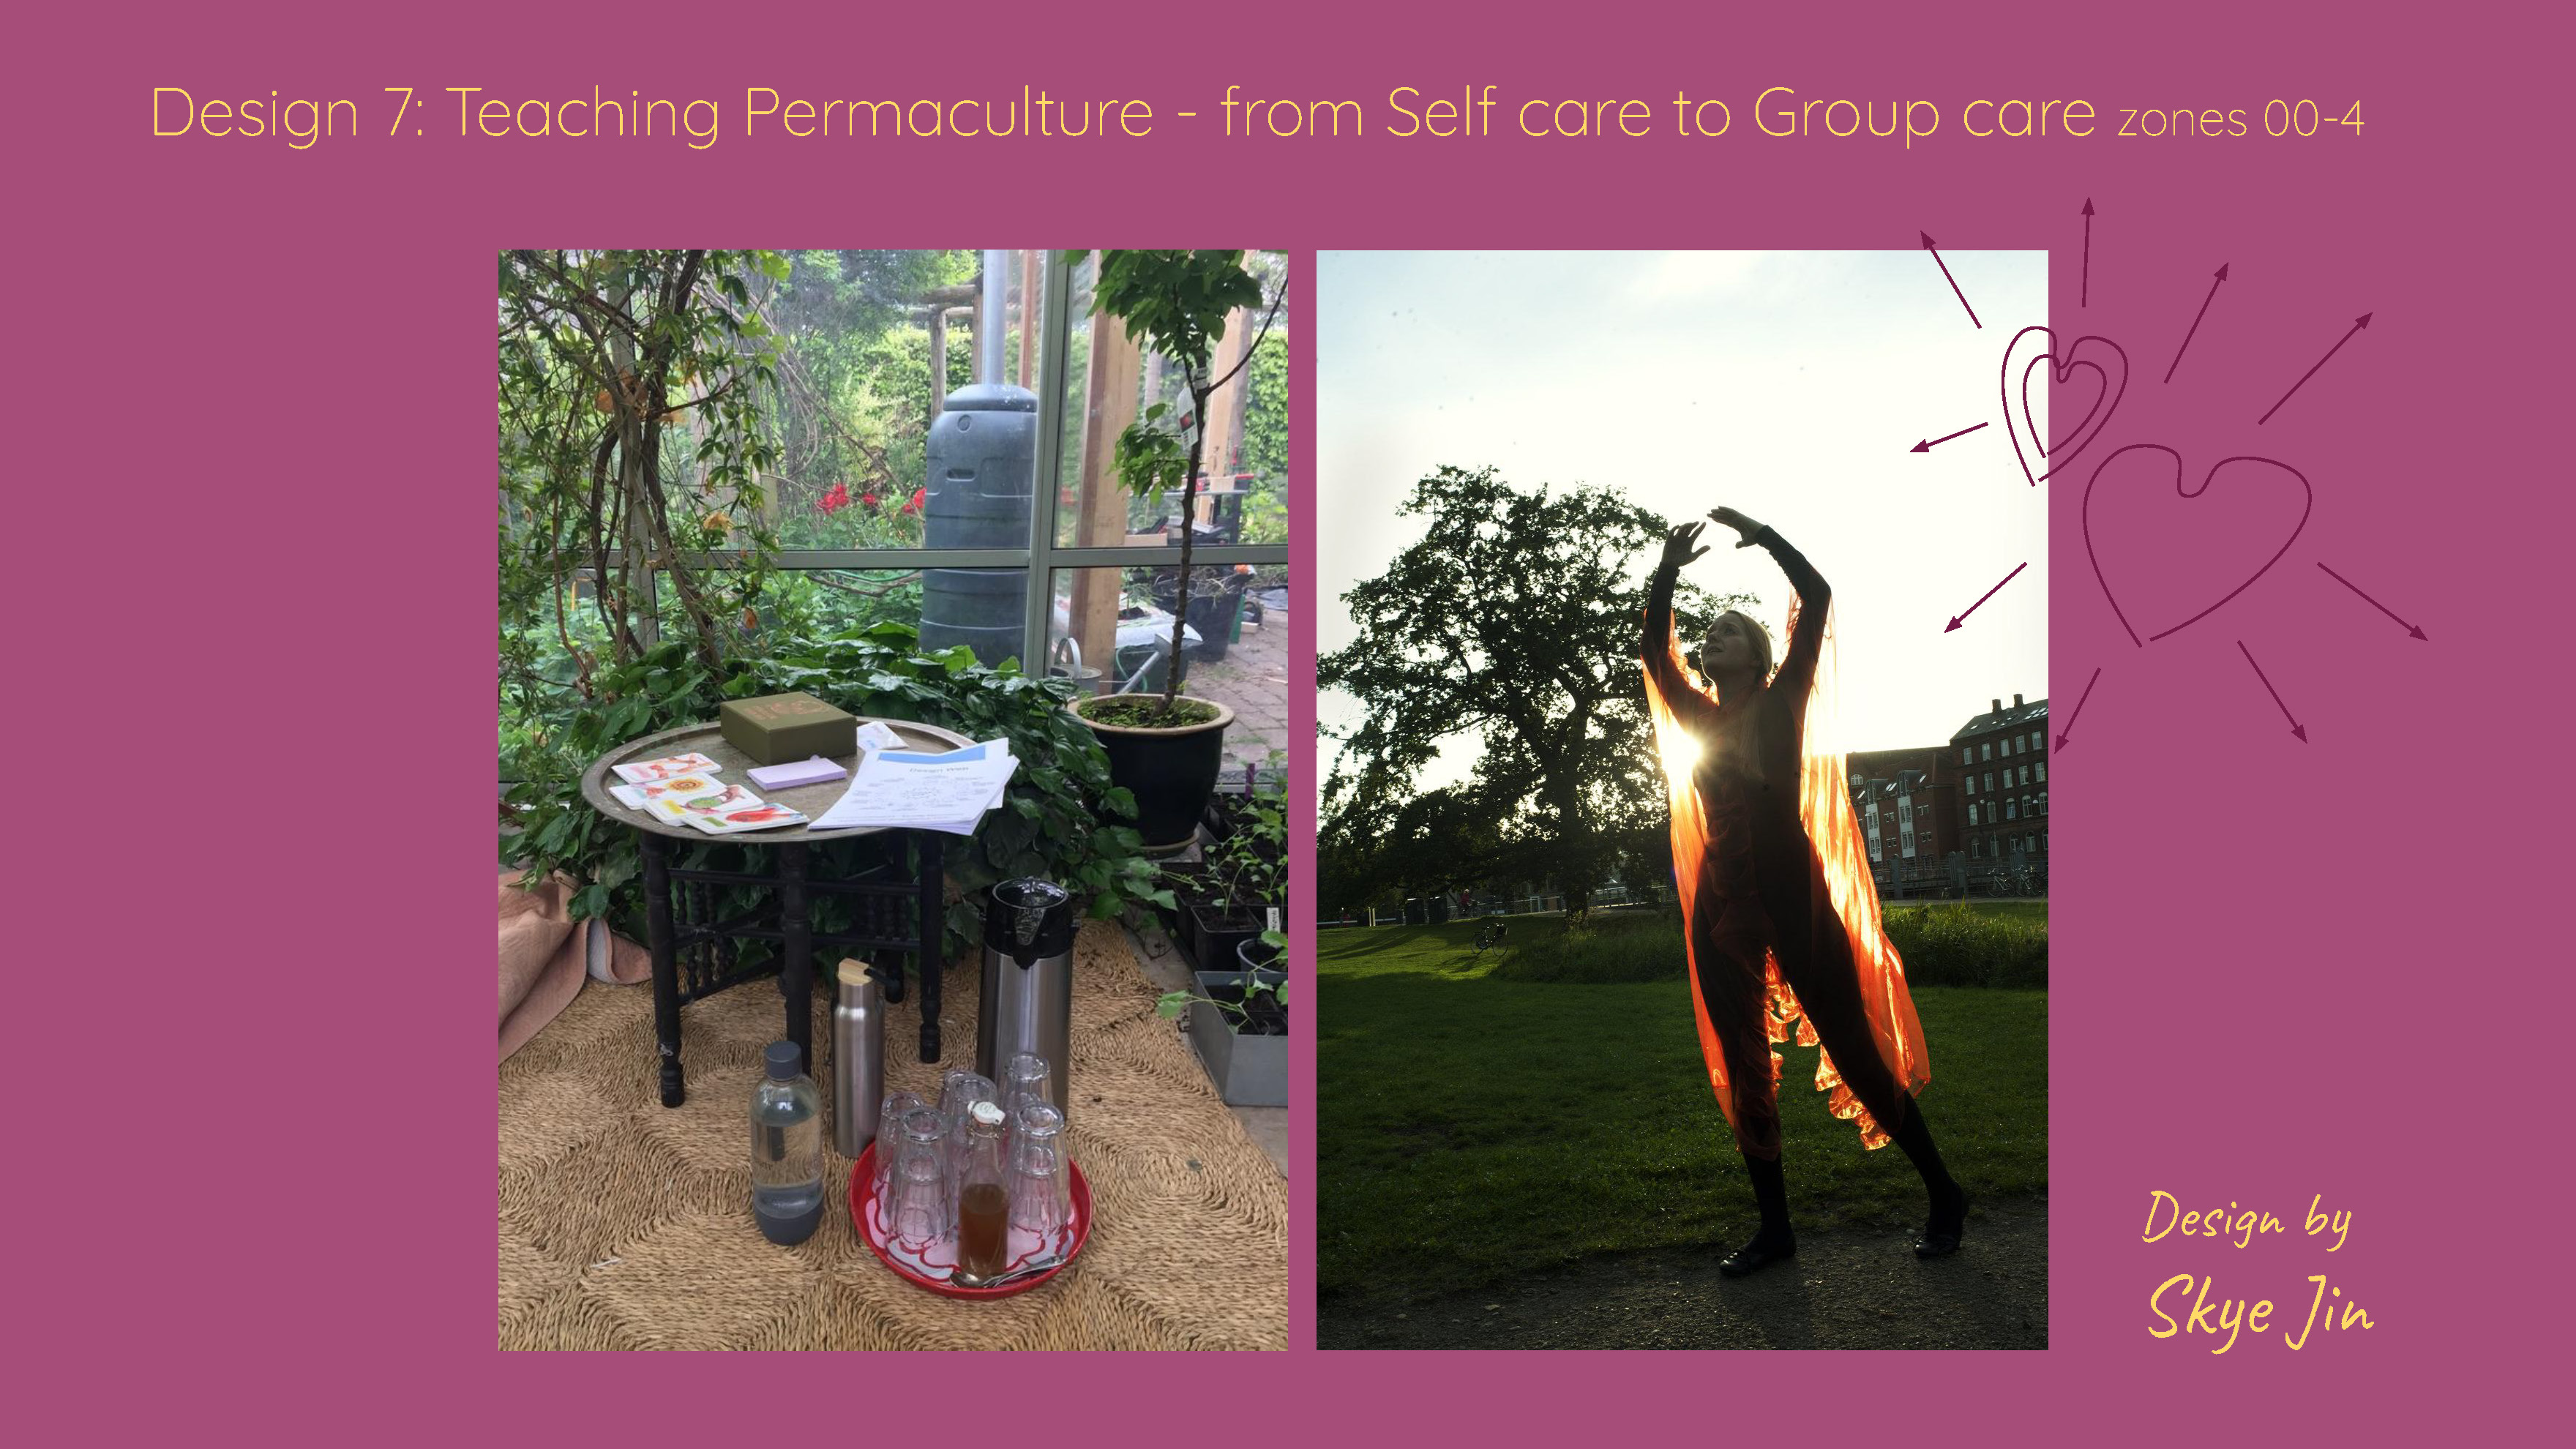 Design 7: Teaching Permaculture  - from Self care to Group care by Skye Jin